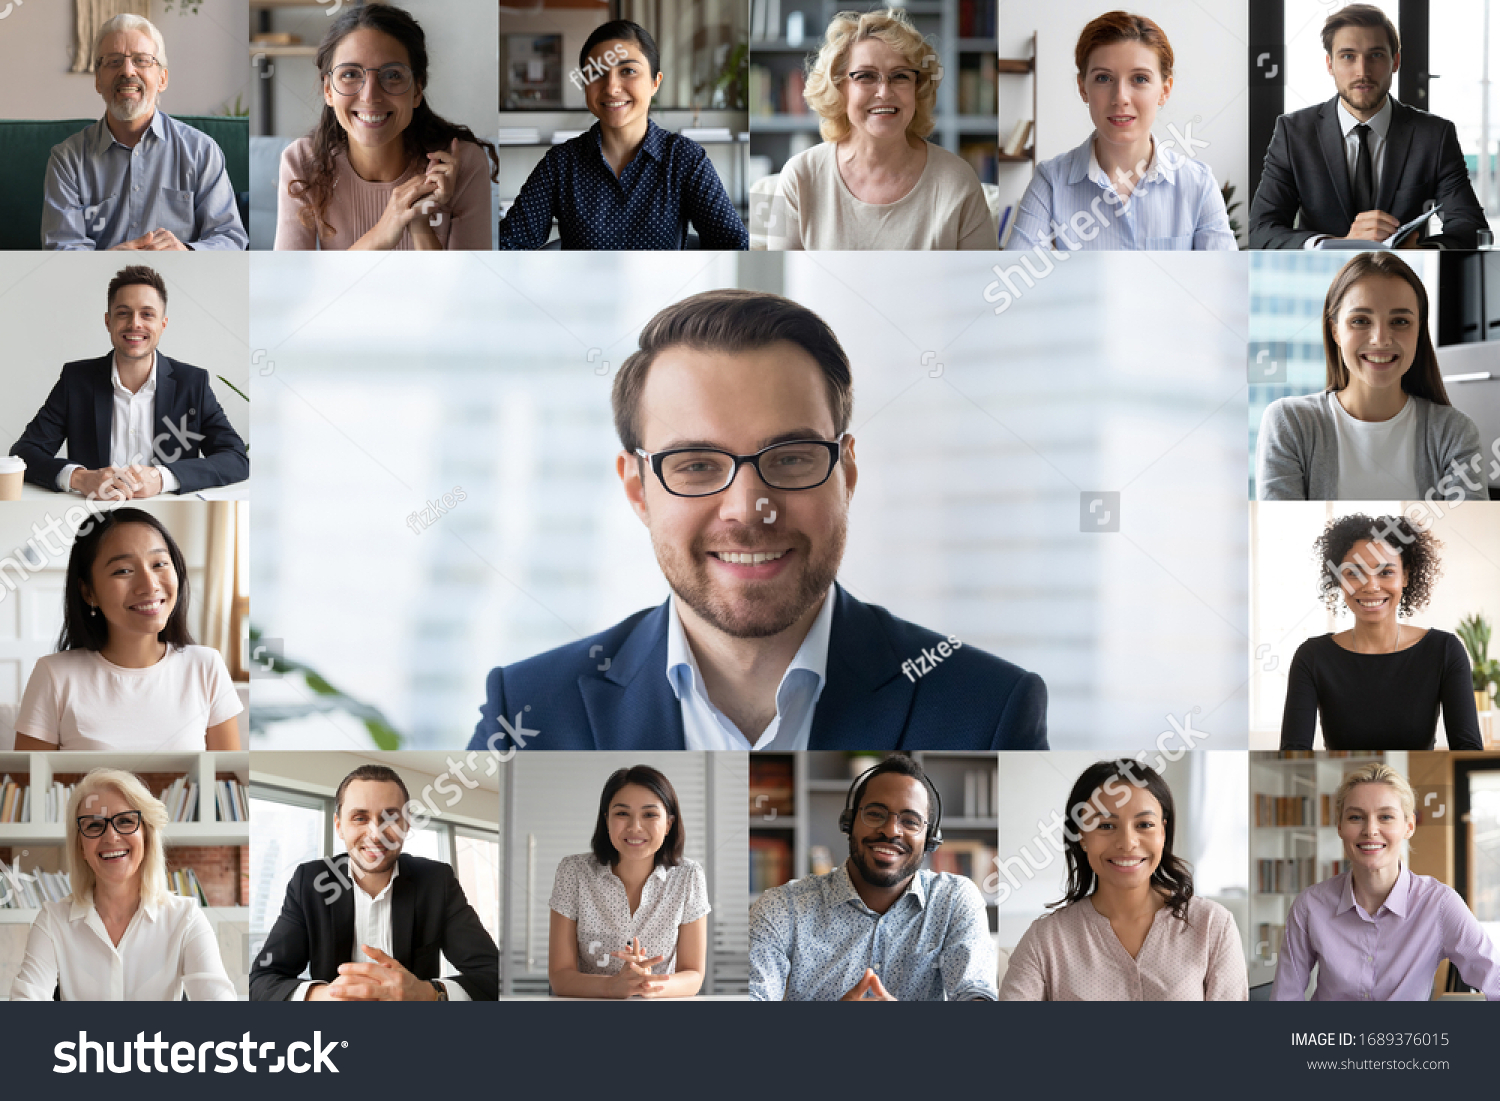 Headshot screen application view of diverse multiracial employees have work web conference using modern platform, smiling multiethnic colleagues talk speak online brainstorm on video call #1689376015